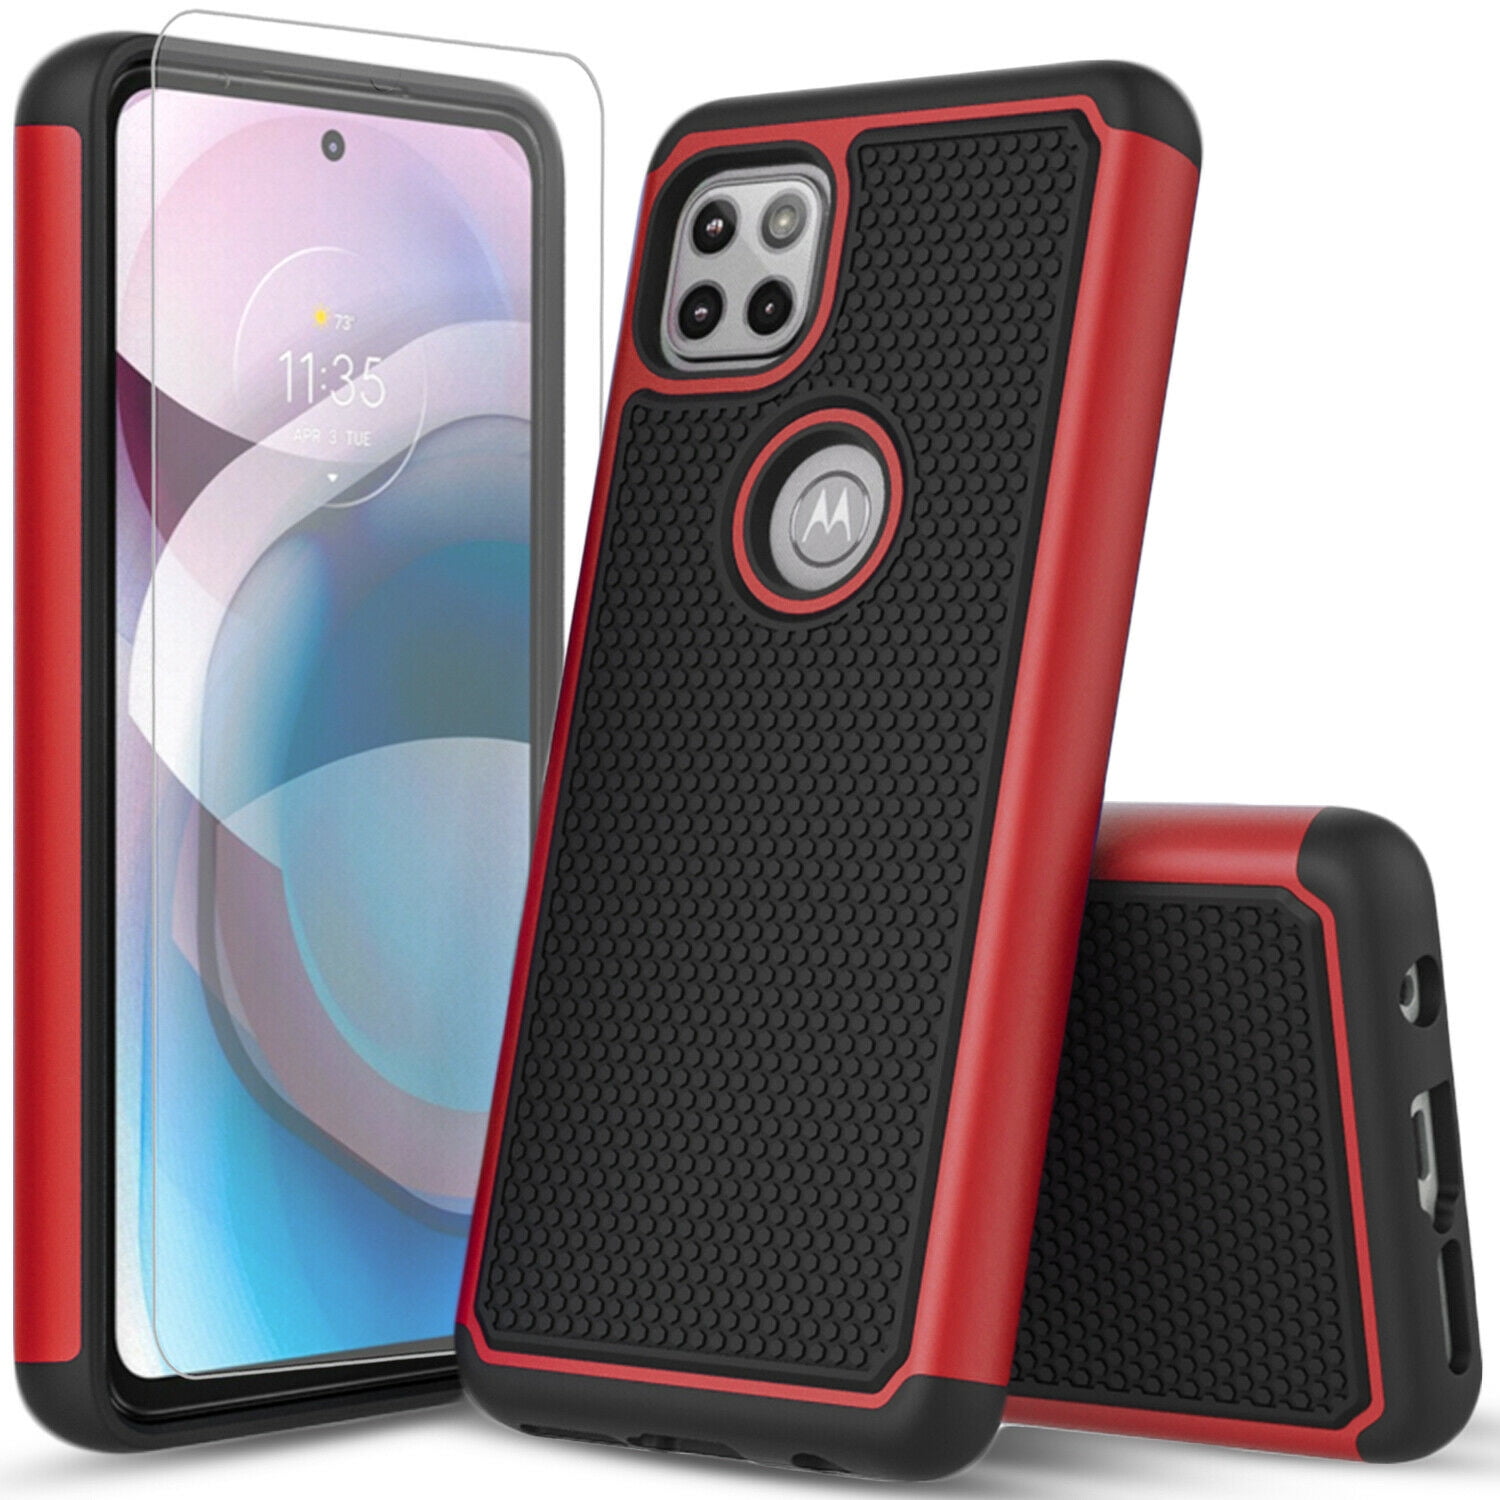 Motorola One 5G ACE Phone Case, Military Grade 6 Feet Drop Test Protection Dual Layer Cover with [Temerped Glass Screen Protector]-Red